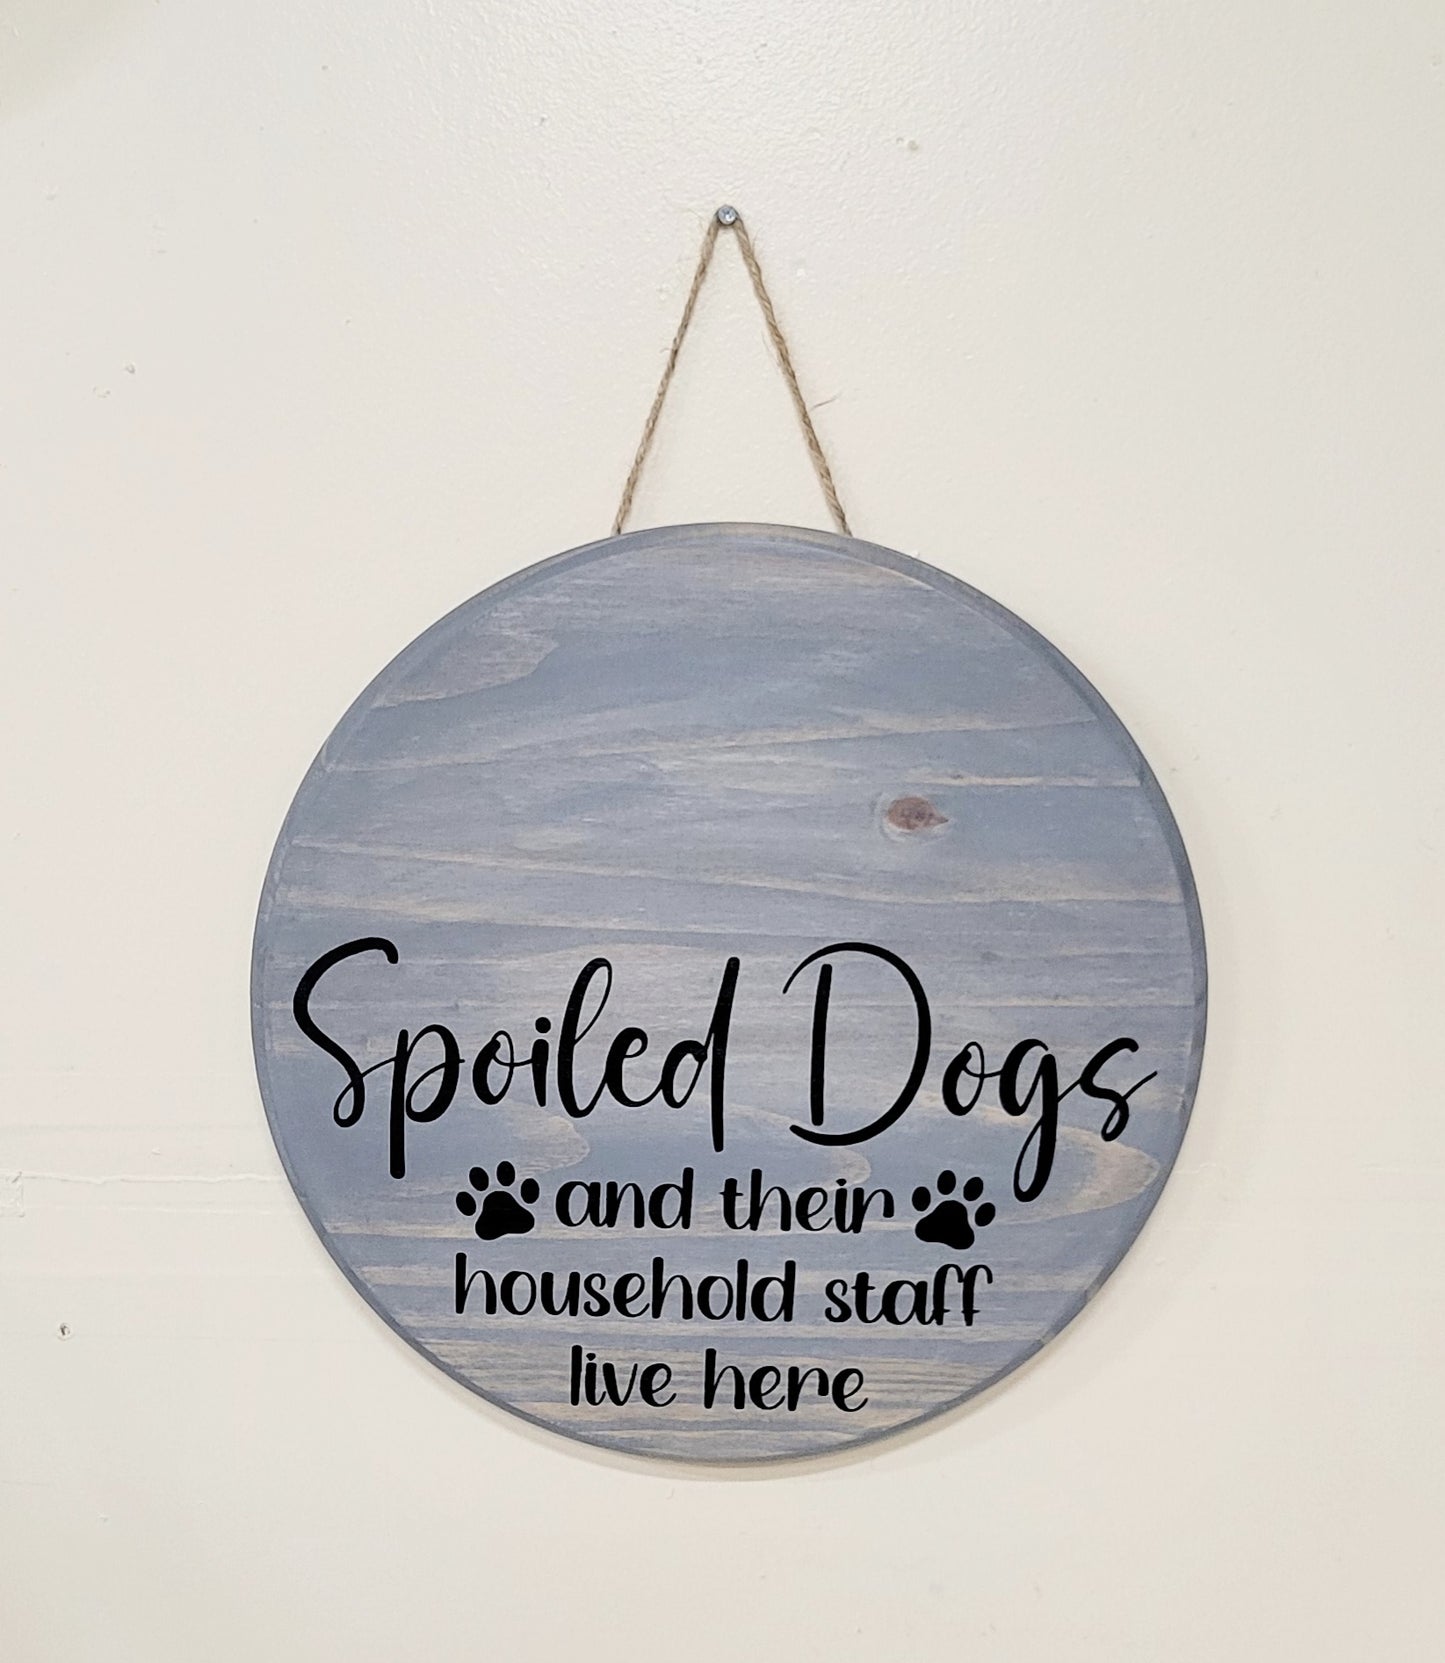 "Spoiled Dog" sign